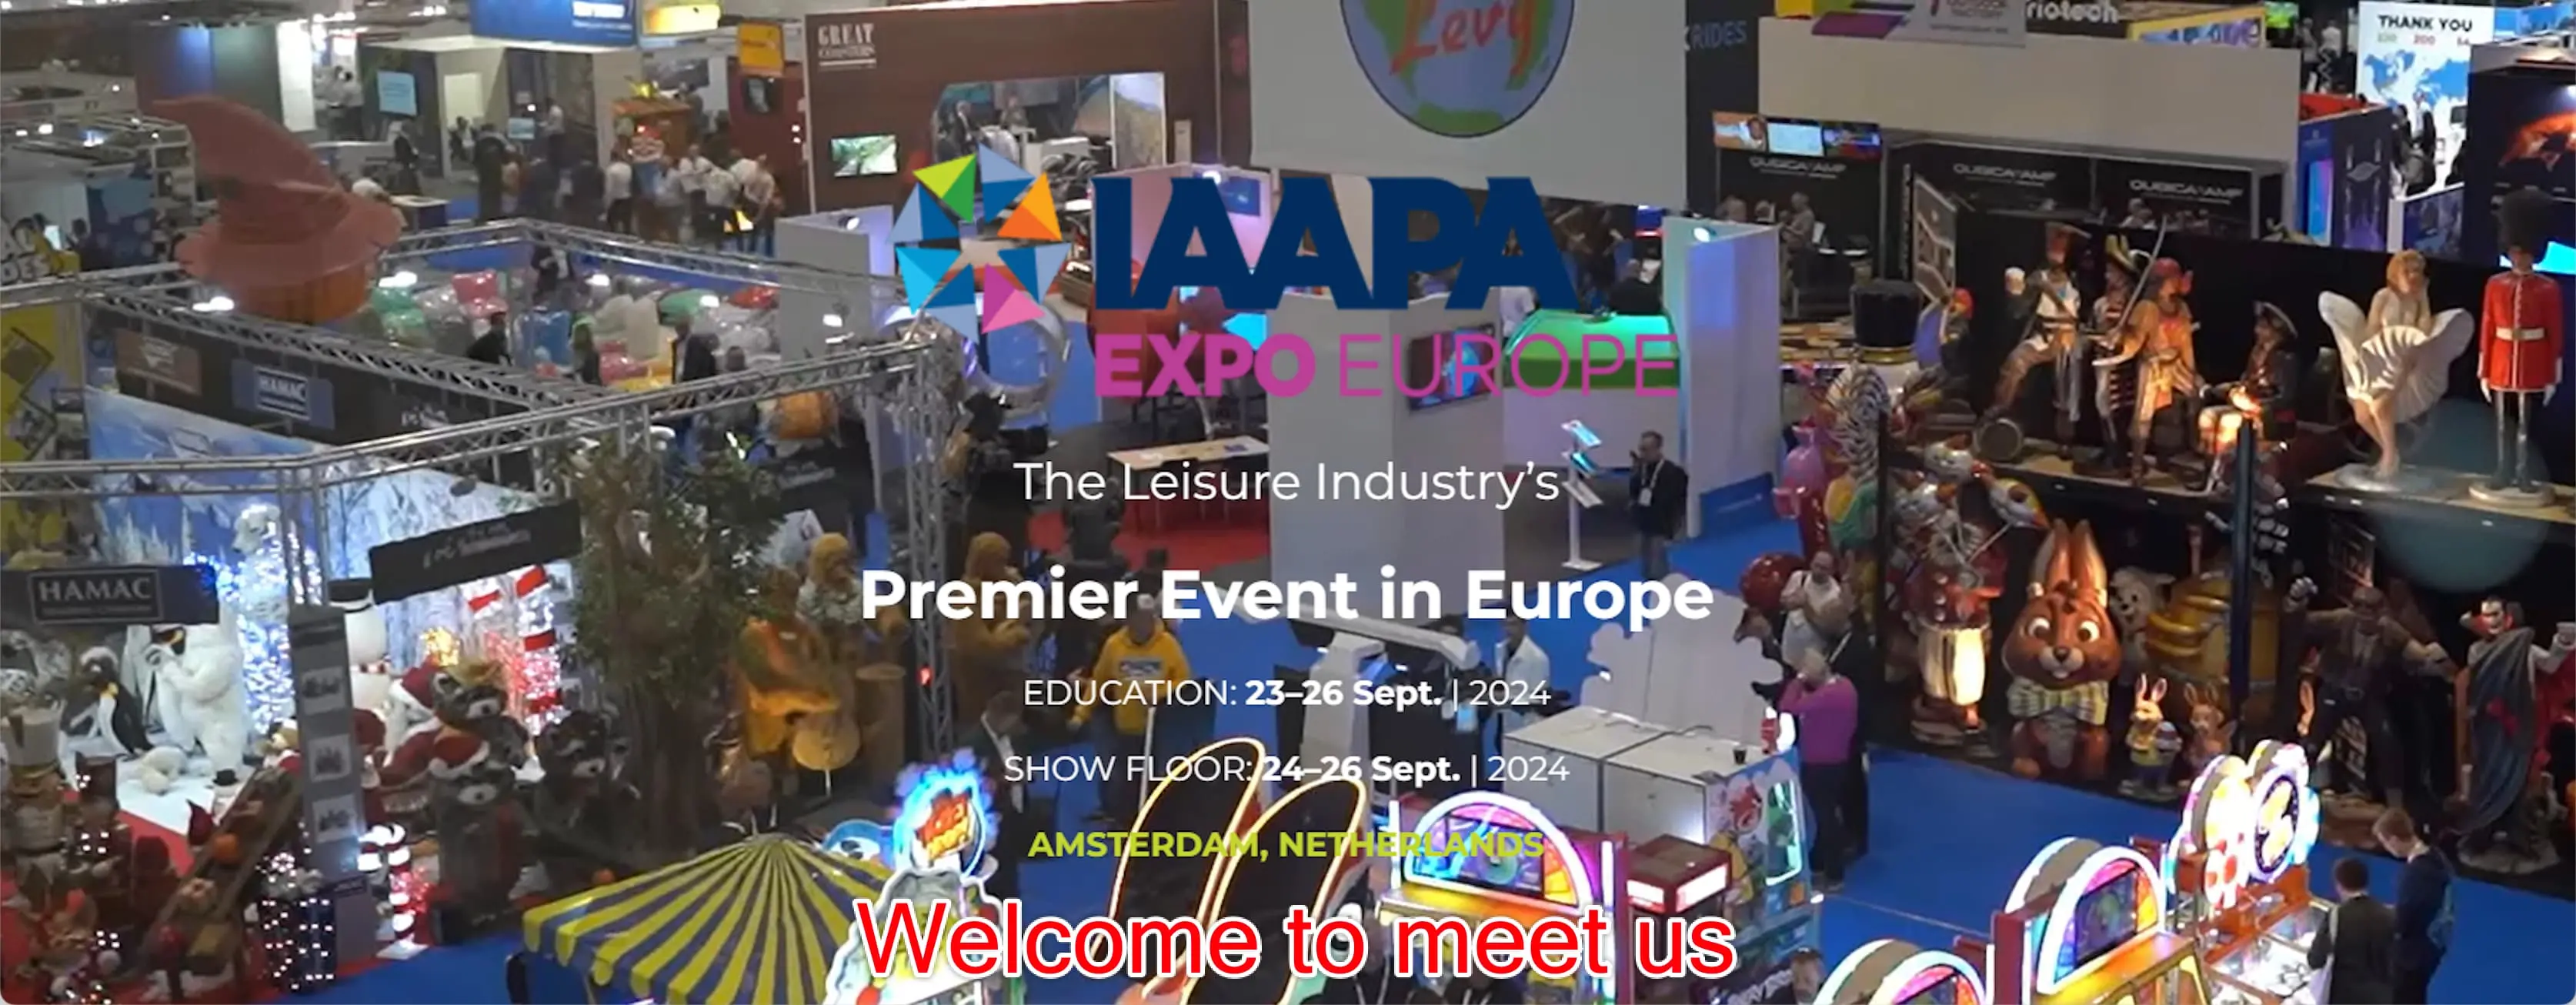 We exhibit at trade shows all over the world, we are happy to see so many old customers and new friends, look forward to meeting you and discussing our cooperation.